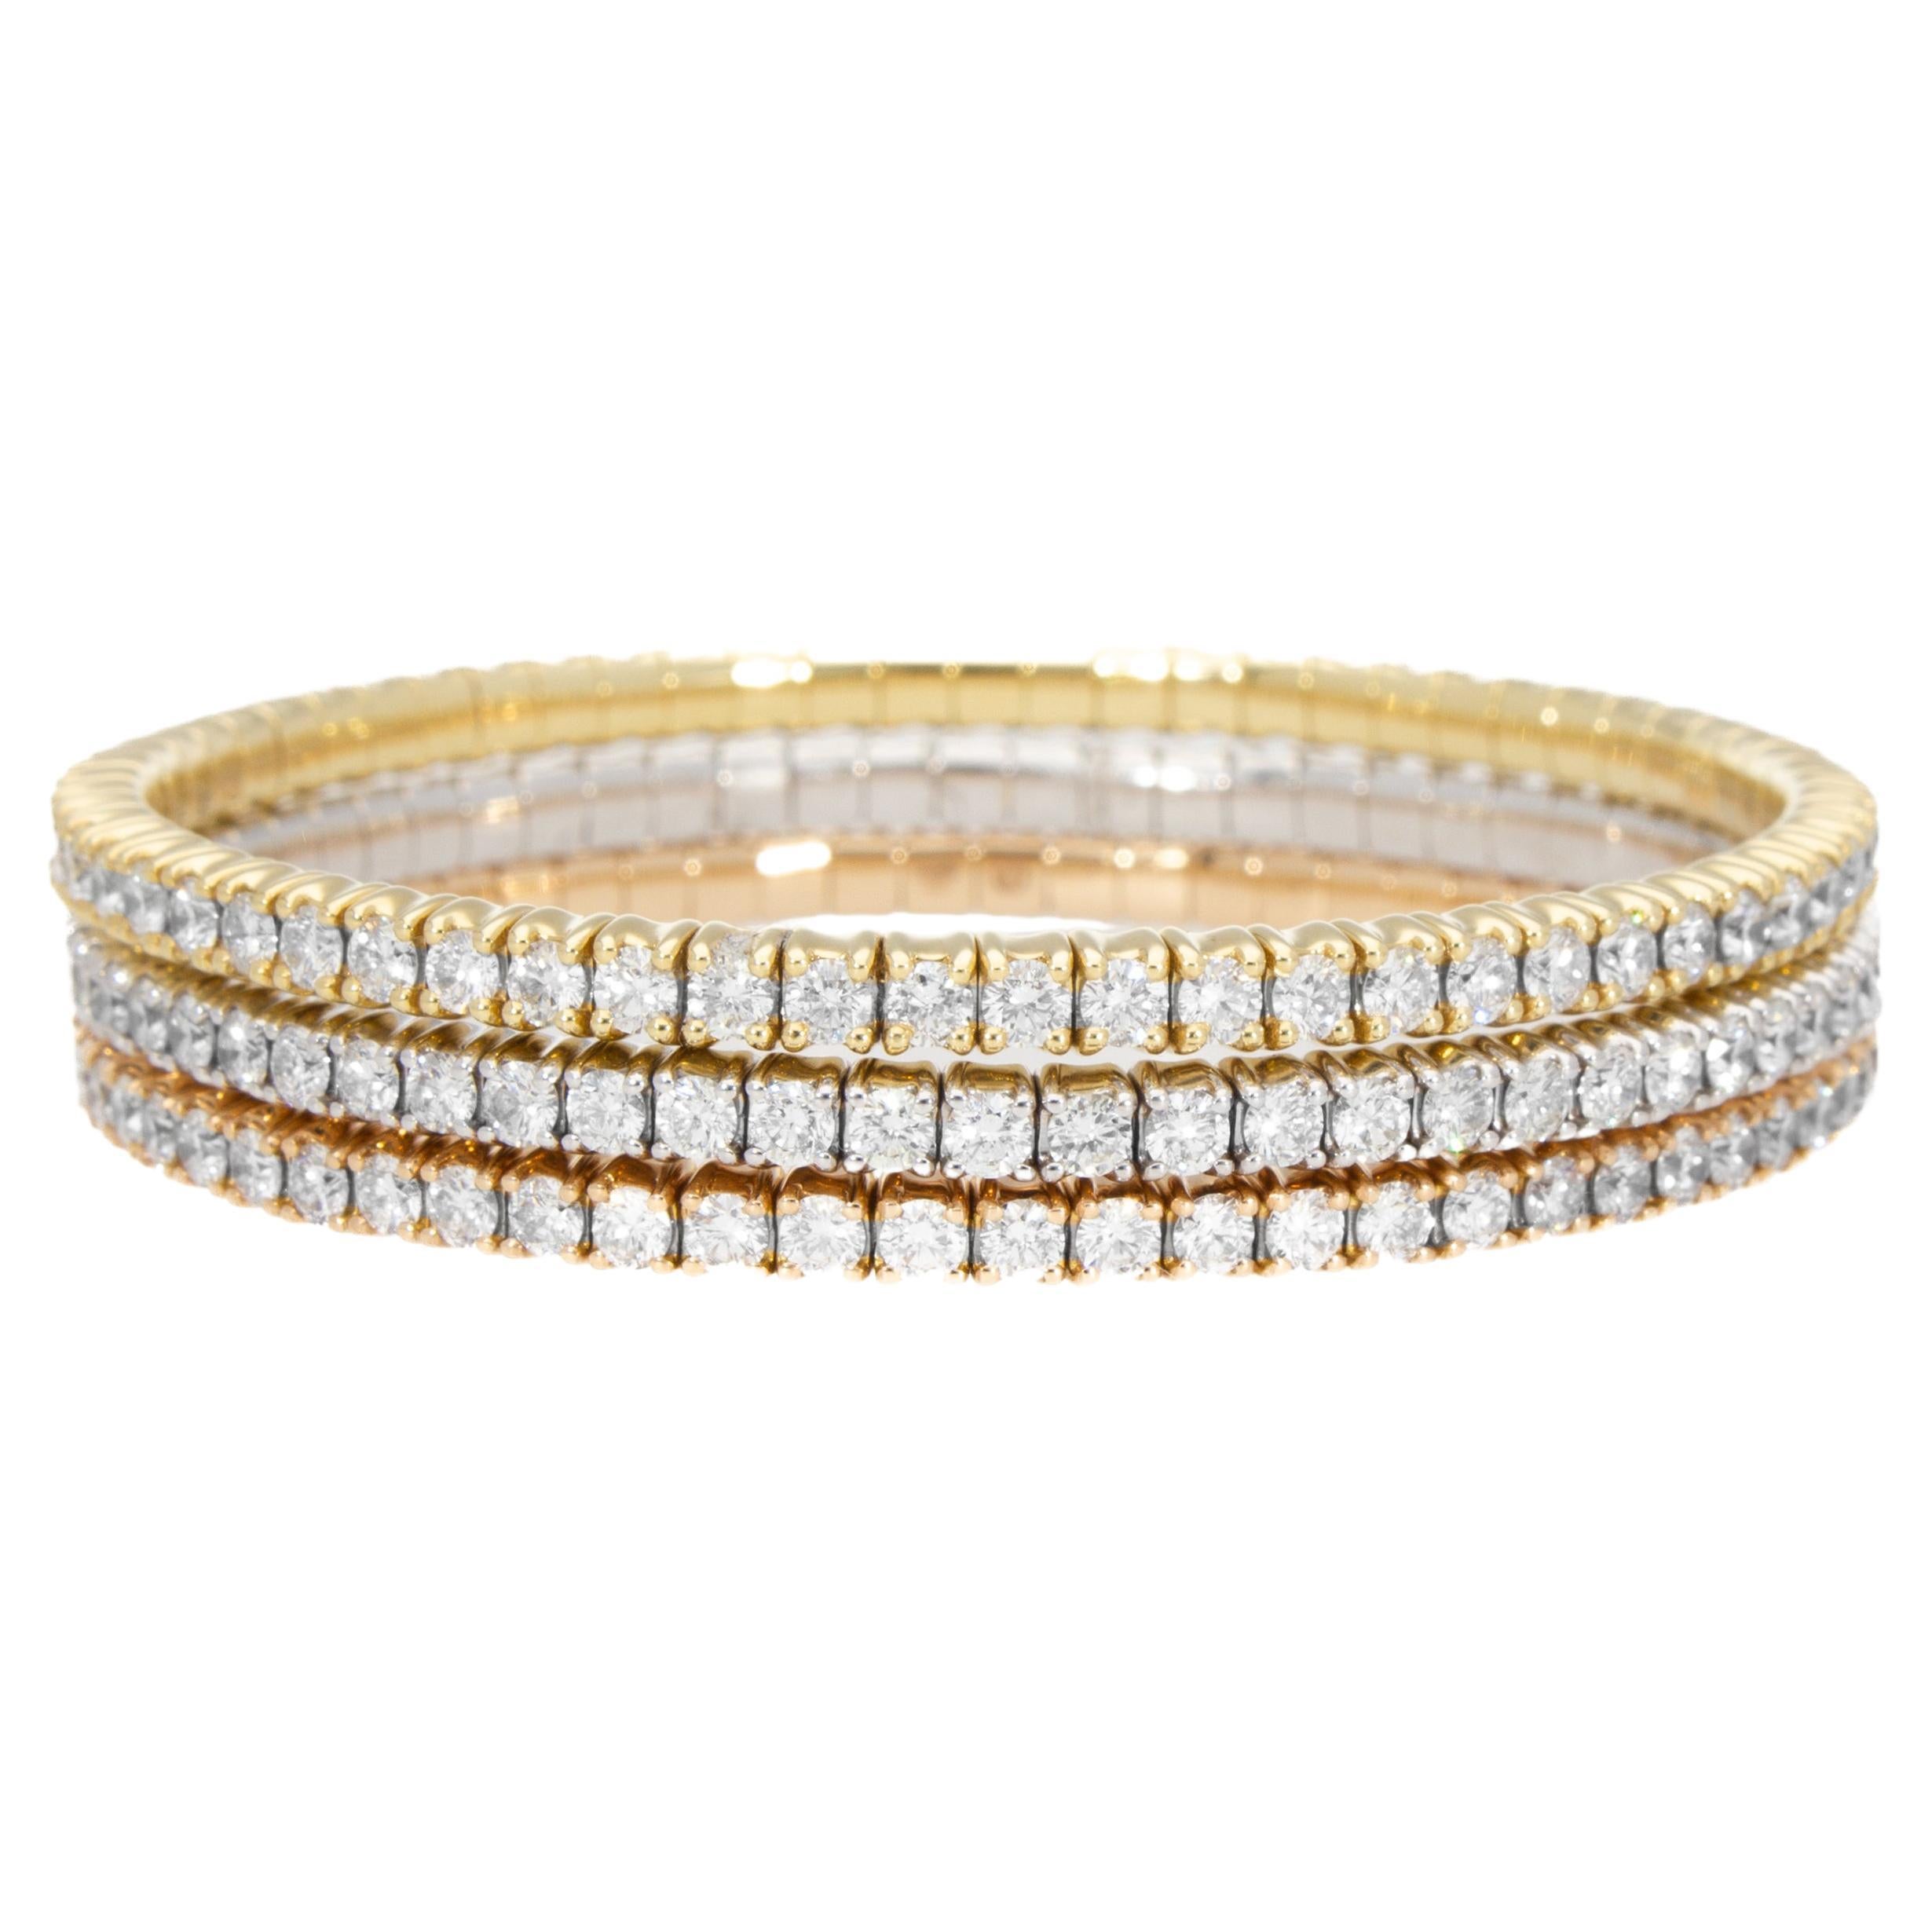 Three Elastic Tennis Bracelets, 12.51 ct Diamonds, Tricolor 18 Kt. Made in Italy For Sale 8